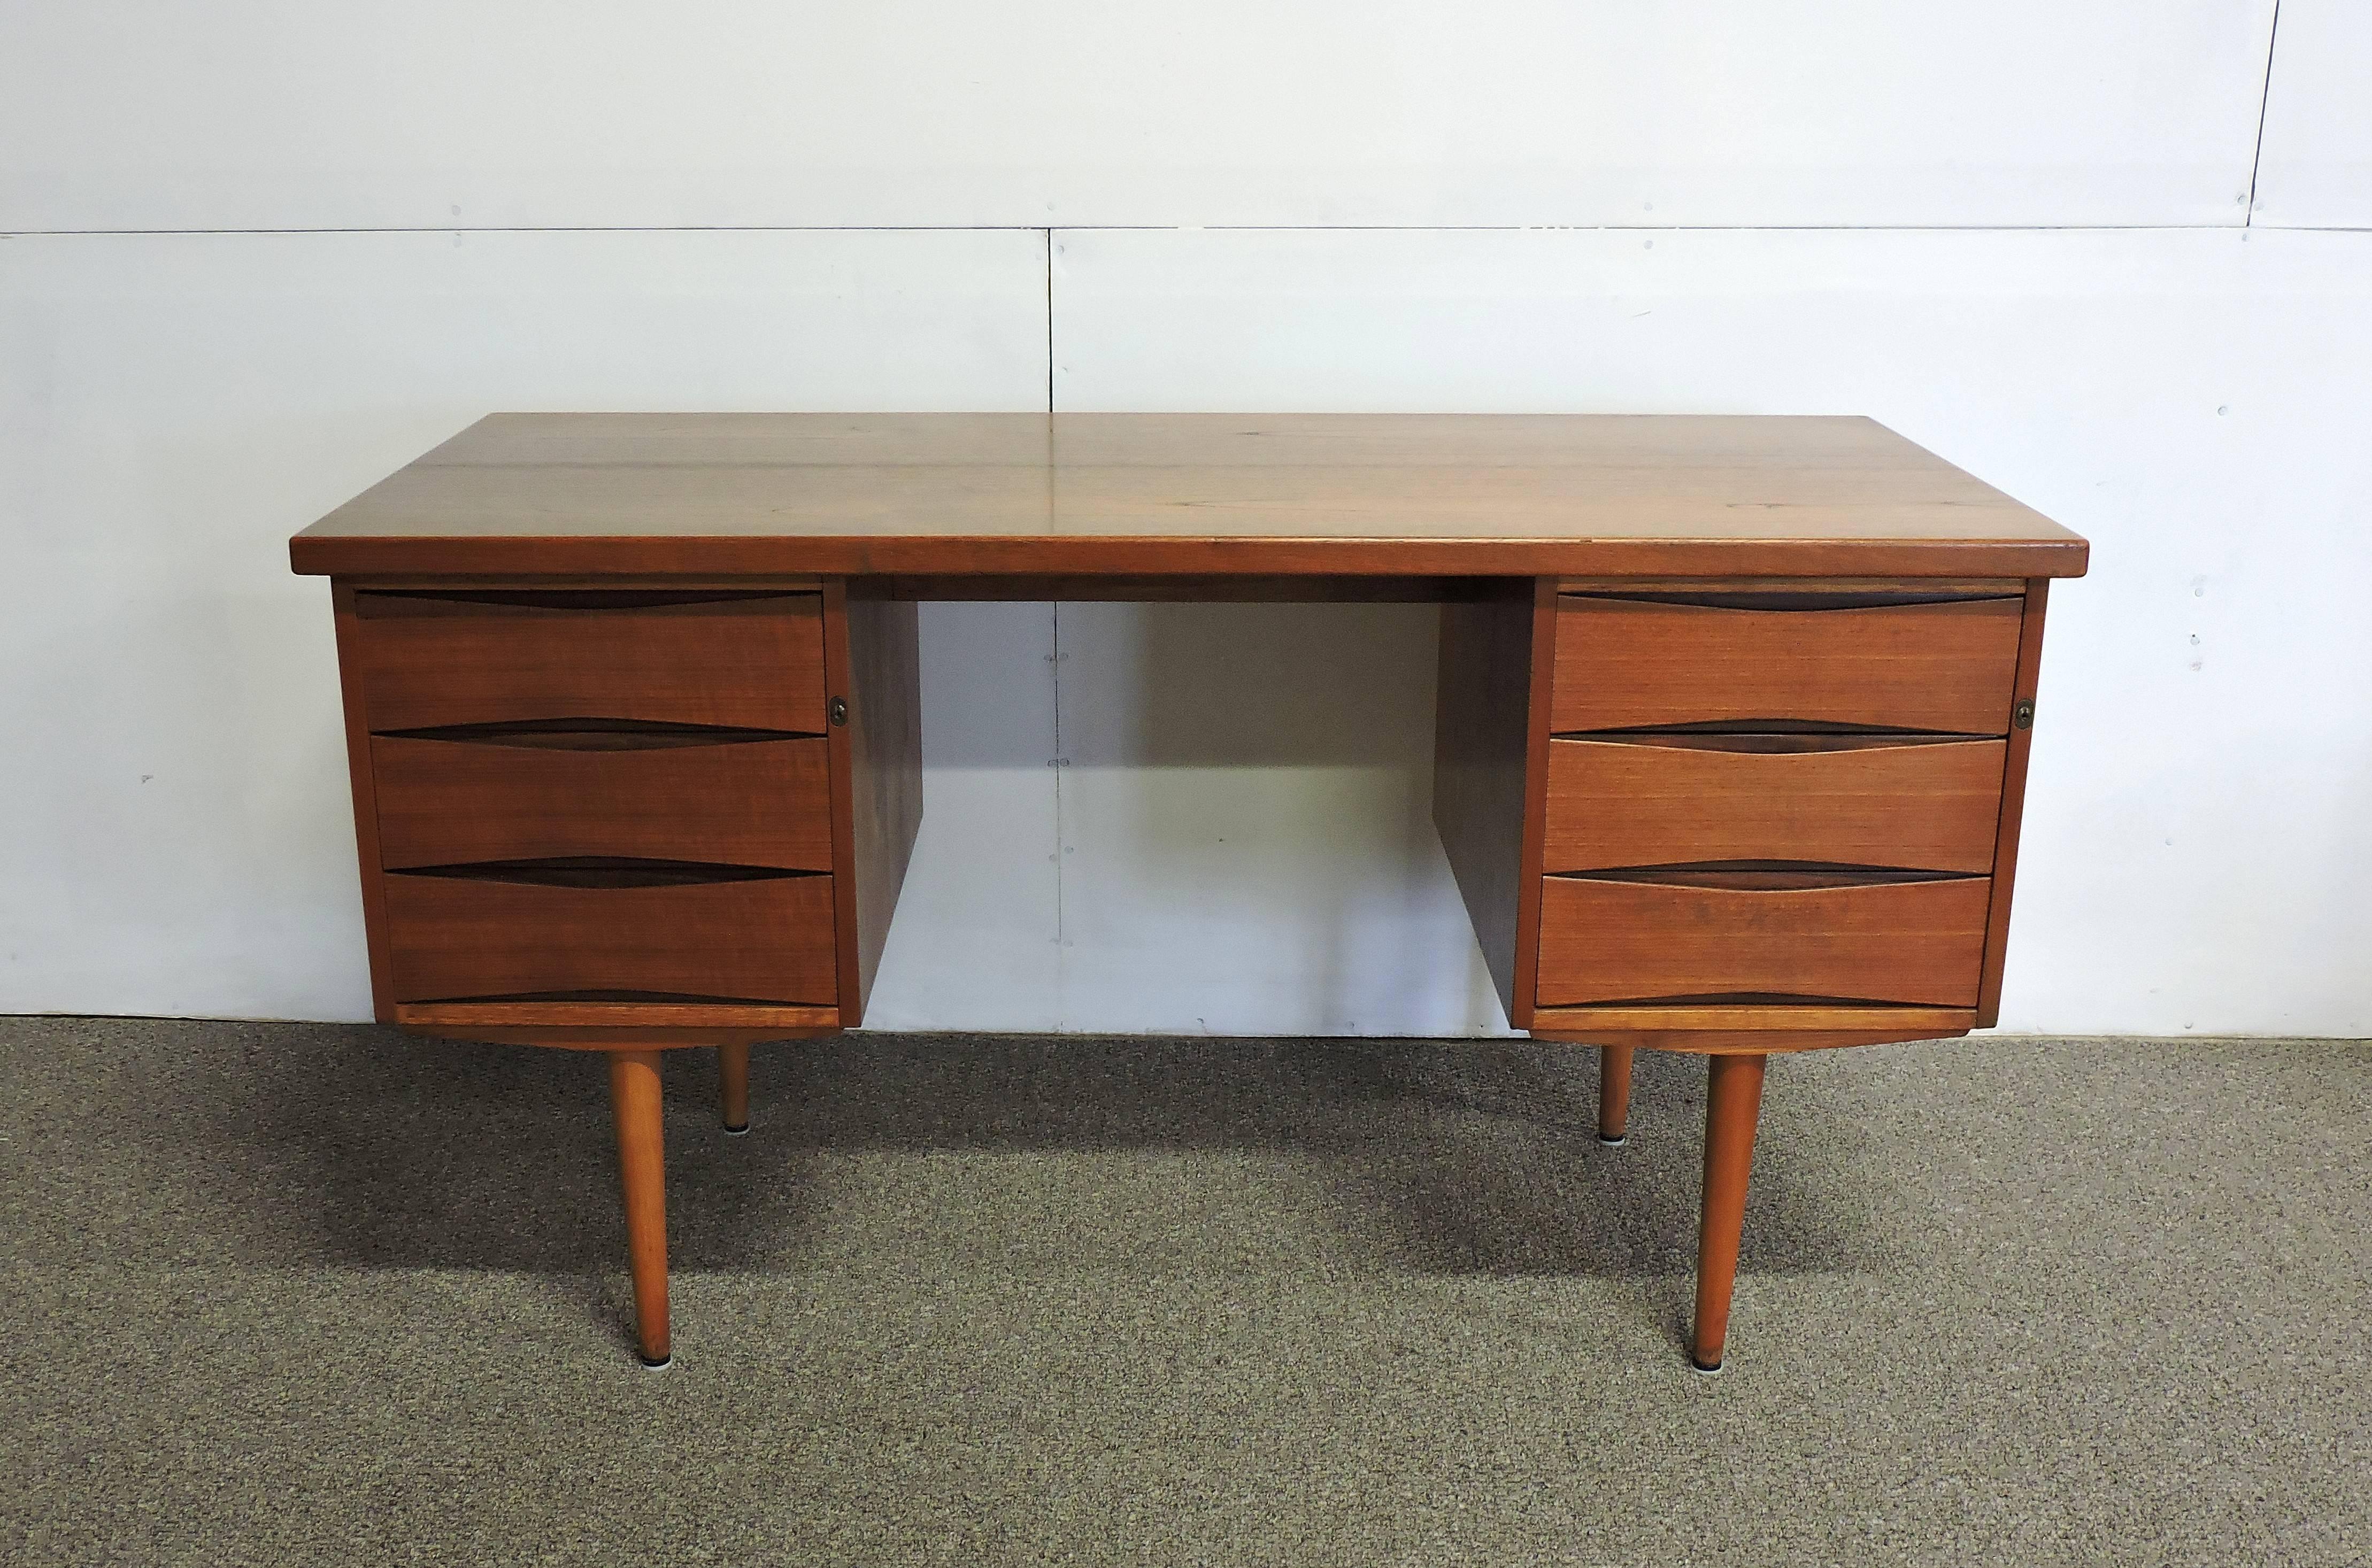 Handsome desk attributed to Arne Vodder and made in Denmark. This desk has a single file cabinet drawer on the right, and three drawers on the left. Both sides lock, and the original key is included. Beautiful eye-shaped recessed pulls and tapered